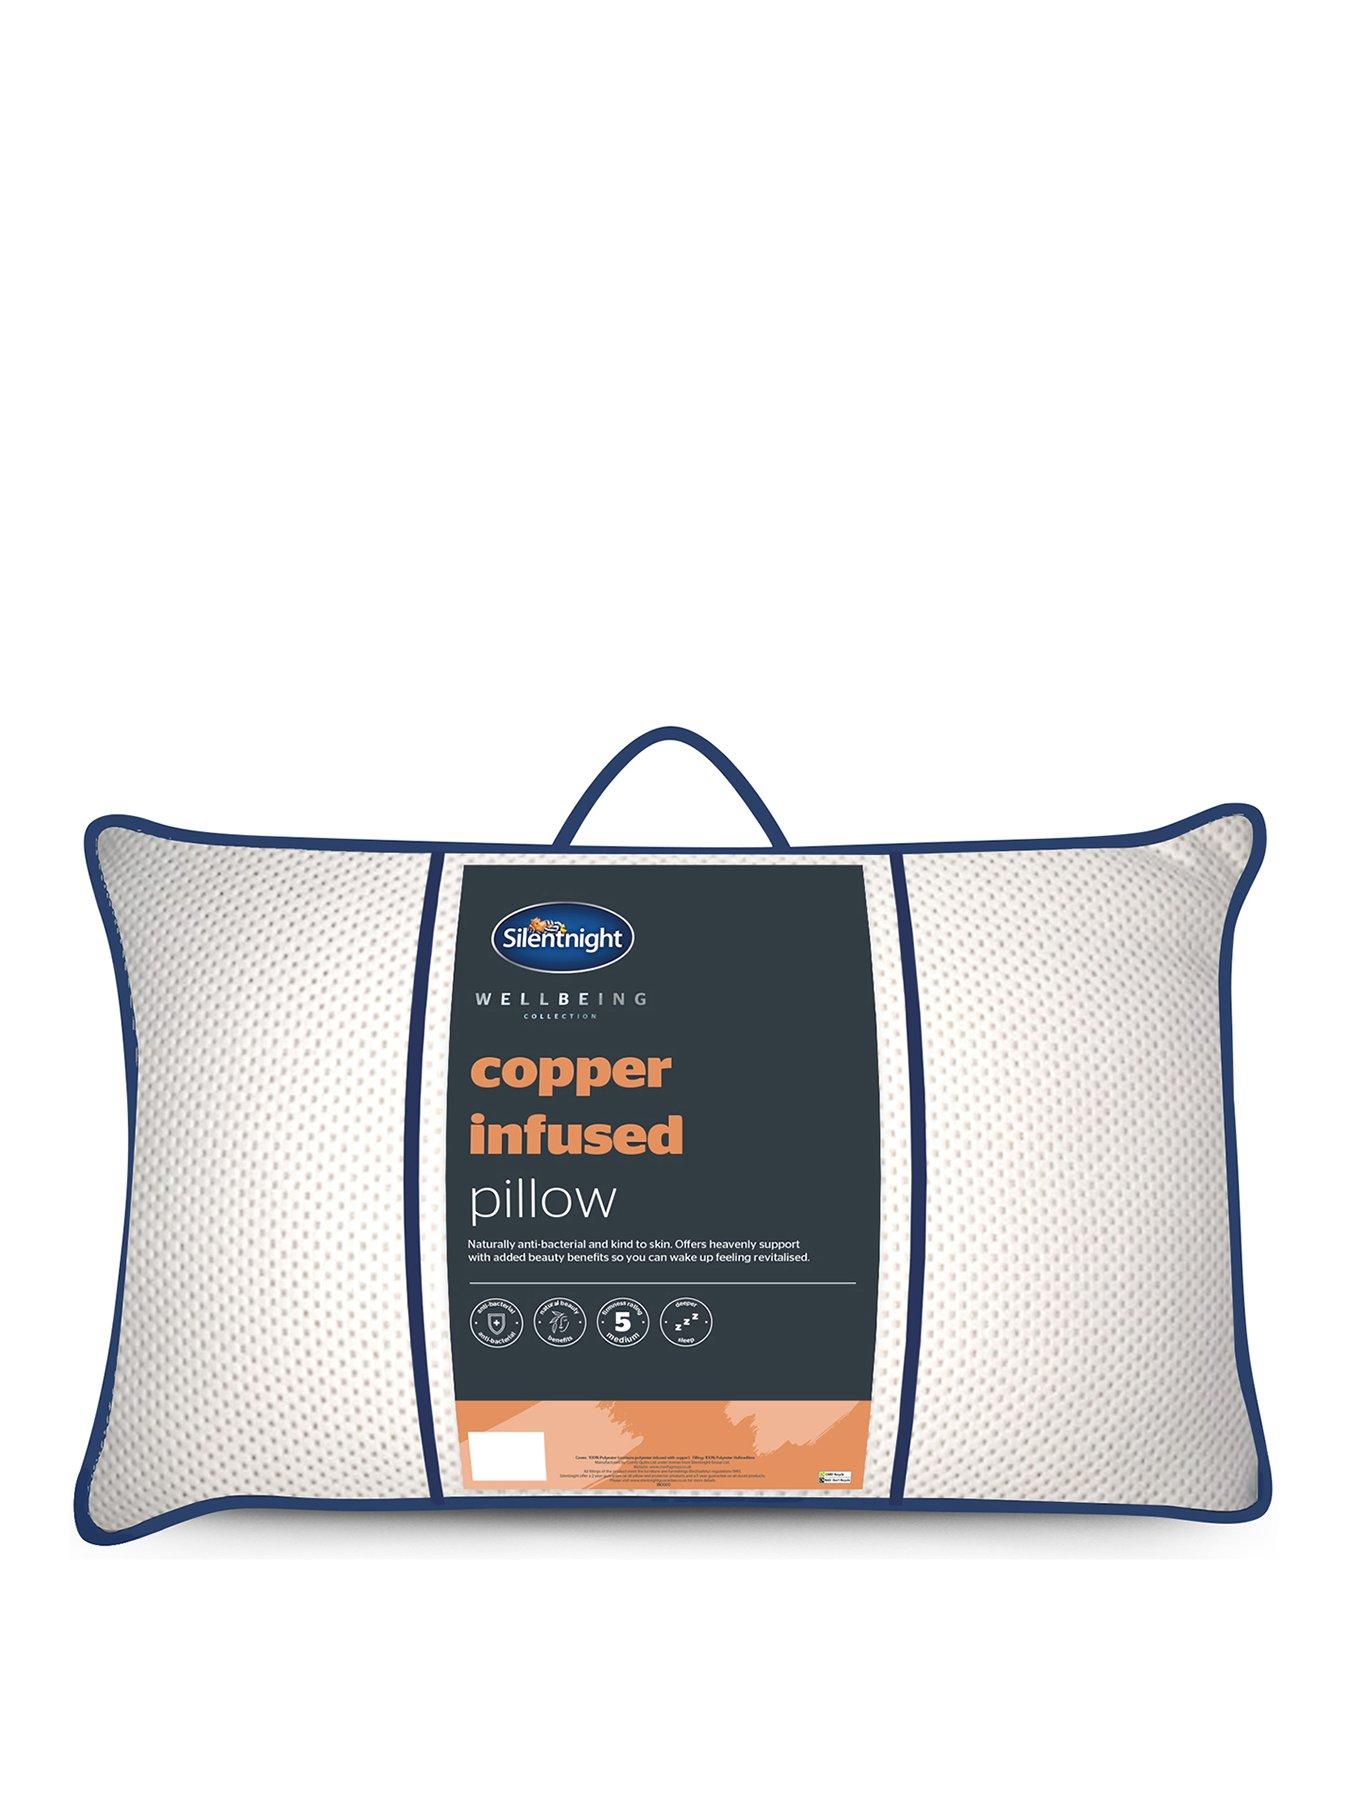 Silentnight Wellbeing 30% Copper Infused Pillow